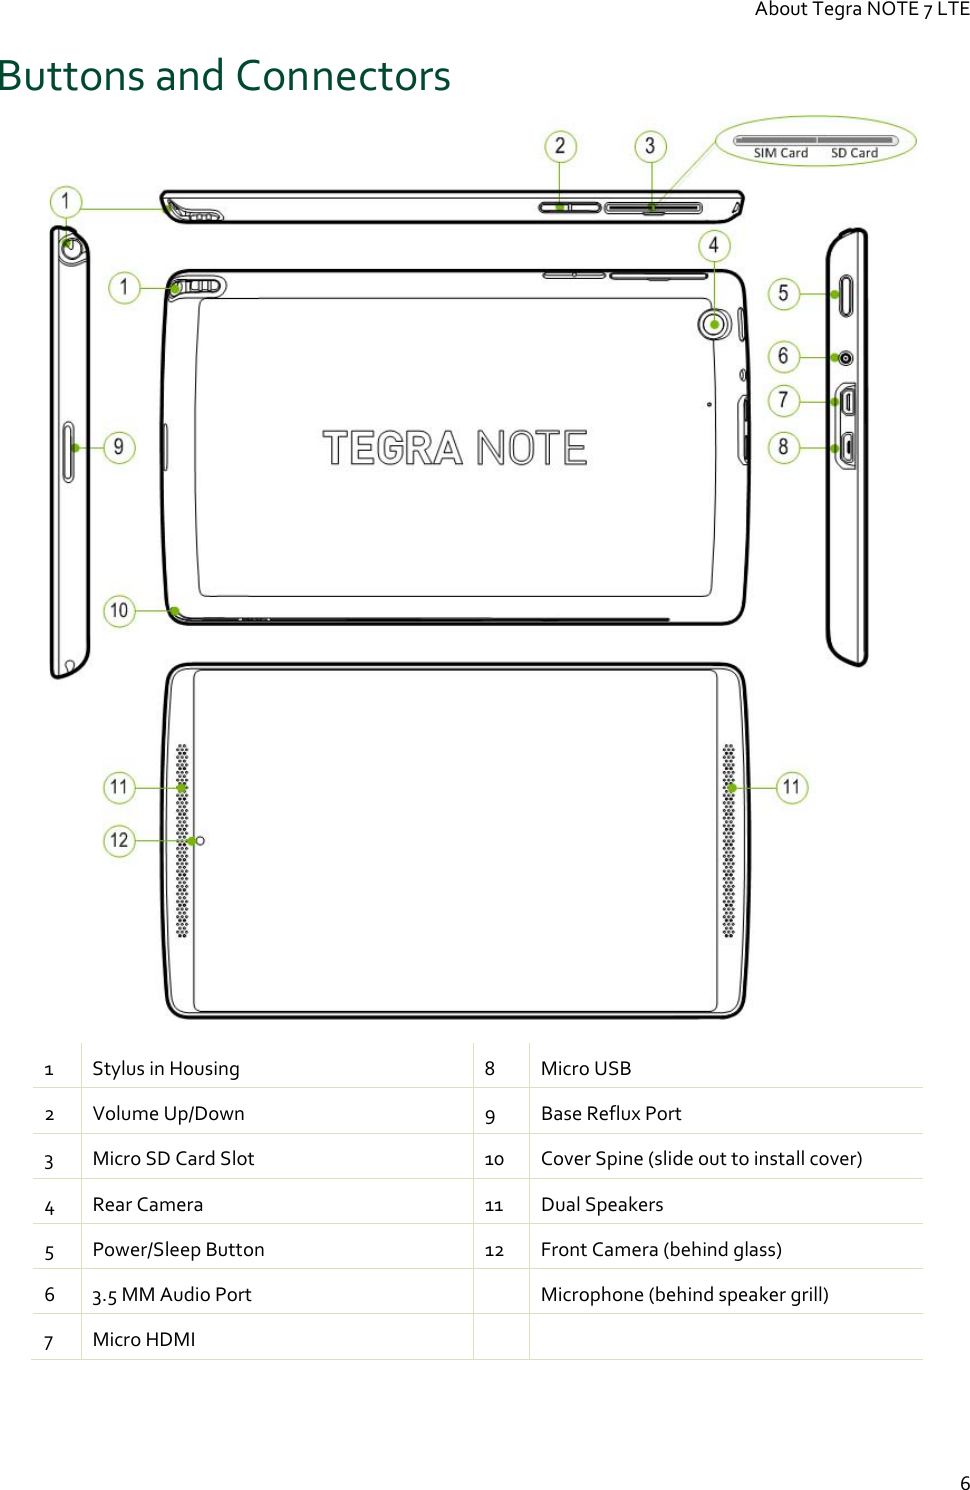 About Tegra NOTE 7 LTE  6 Buttons and Connectors   1  Stylus in Housing  8  Micro USB 2  Volume Up/Down  9  Base Reflux Port 3  Micro SD Card Slot  10  Cover Spine (slide out to install cover) 4  Rear Camera  11  Dual Speakers 5  Power/Sleep Button  12  Front Camera (behind glass) 6  3.5 MM Audio Port    Microphone (behind speaker grill) 7  Micro HDMI     